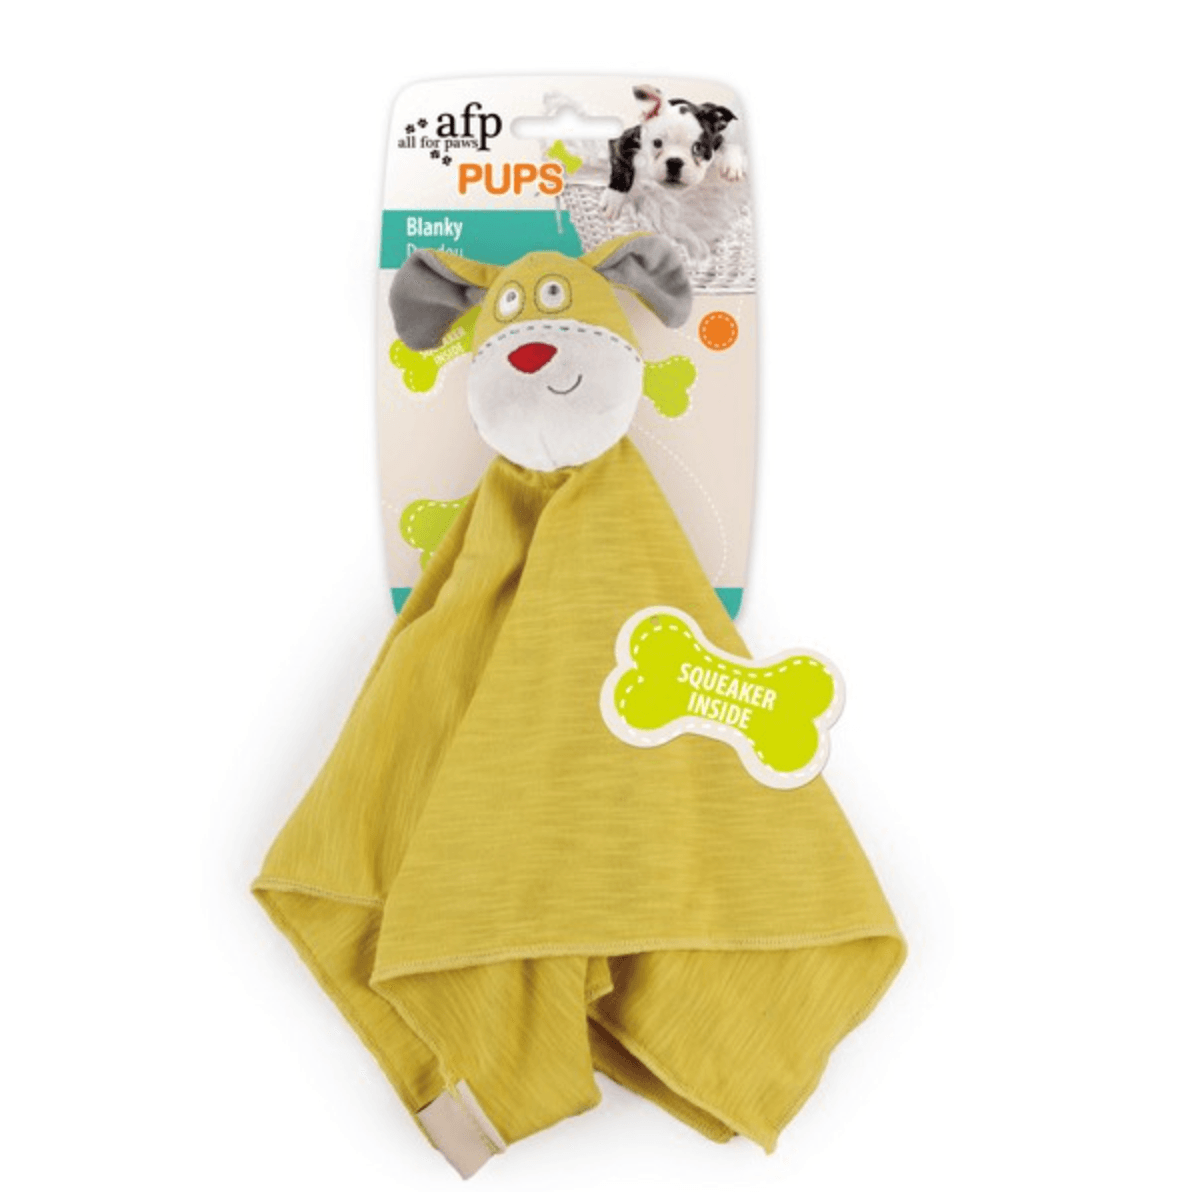 All For Paws Pups Blanky - Pet's Play Toy Store